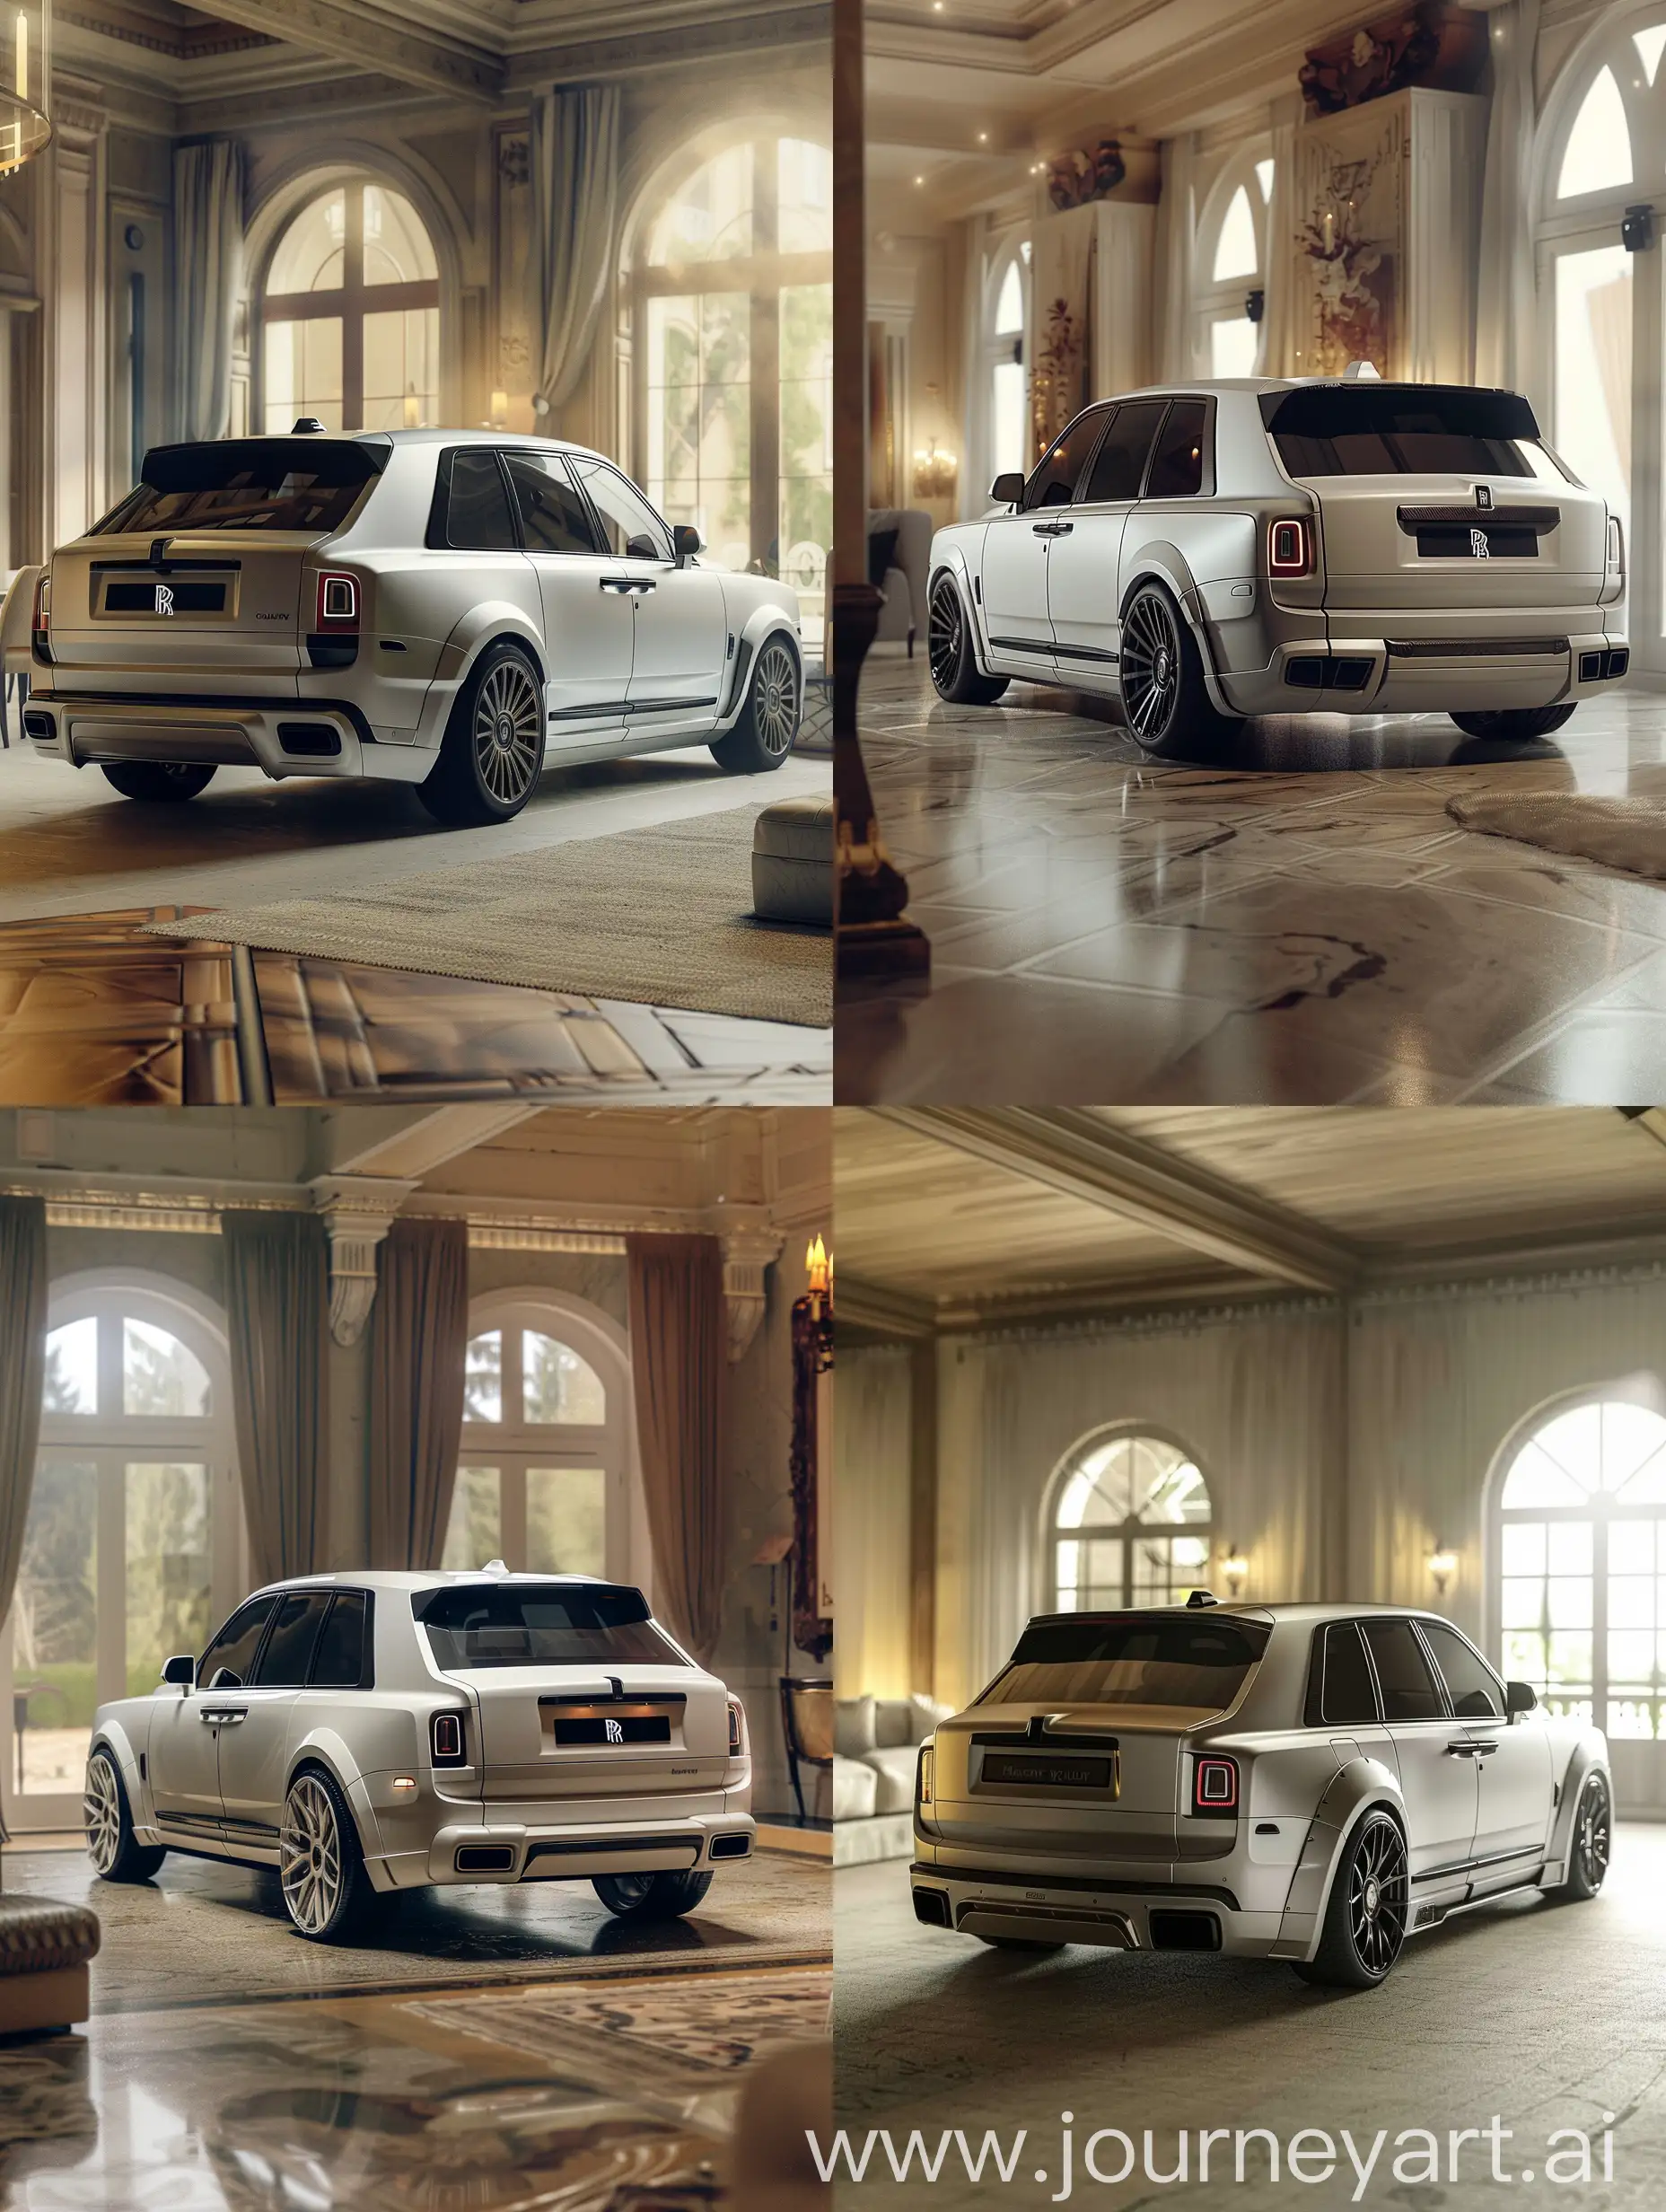 Generate a realistic photo,back view, mansory rolls royce cullinan, body kit, inside a beatiful living room, drama CAMERA HAZE, BLUR, Magazine LUT, HIGH RESOLUTION. as a decorative object, real size